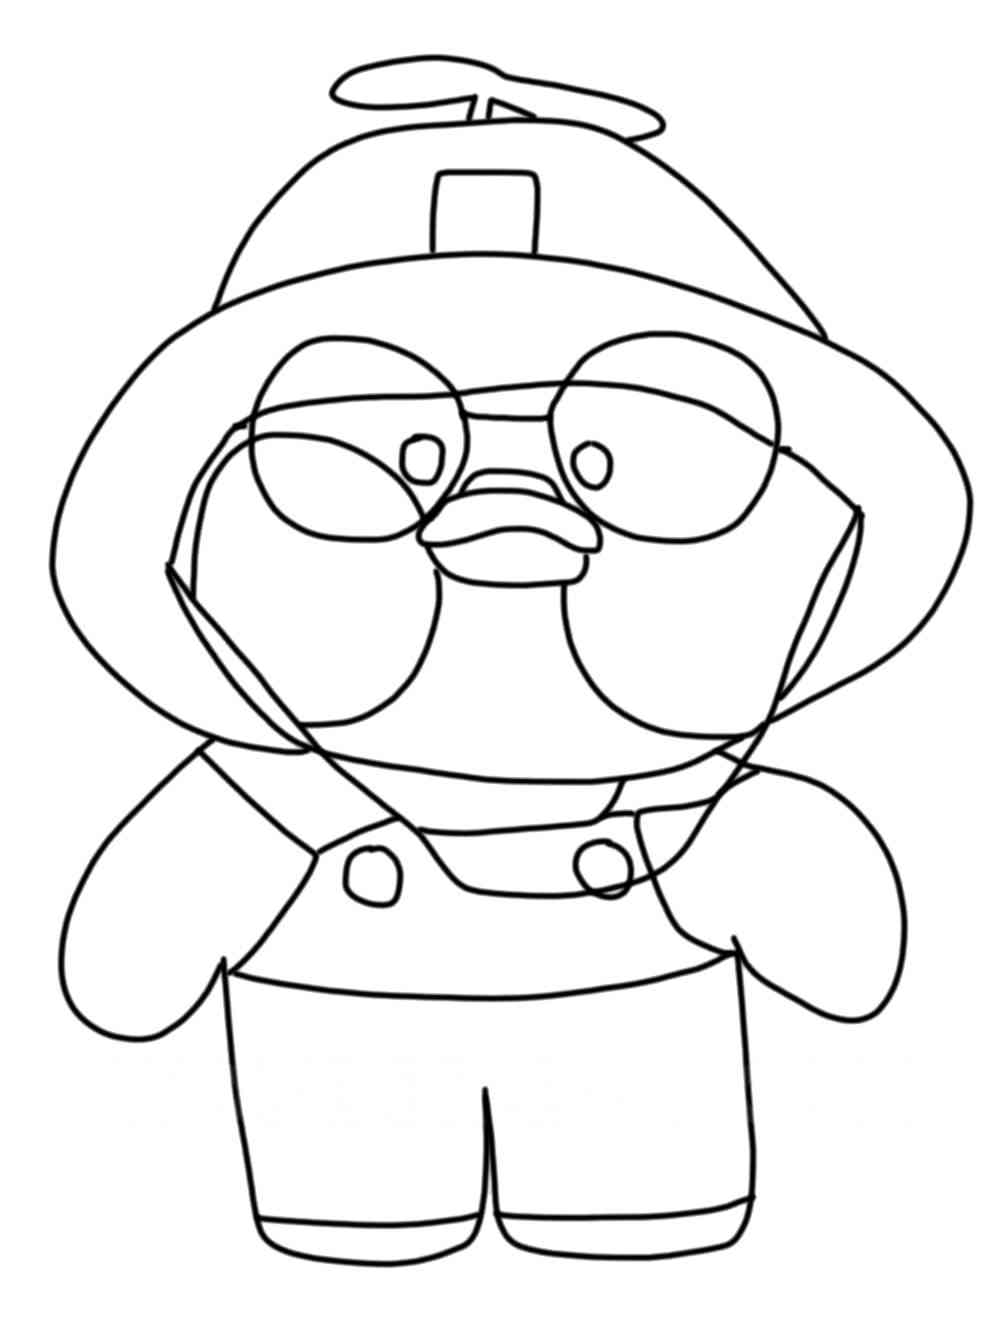 Lalafanfan coloring pages